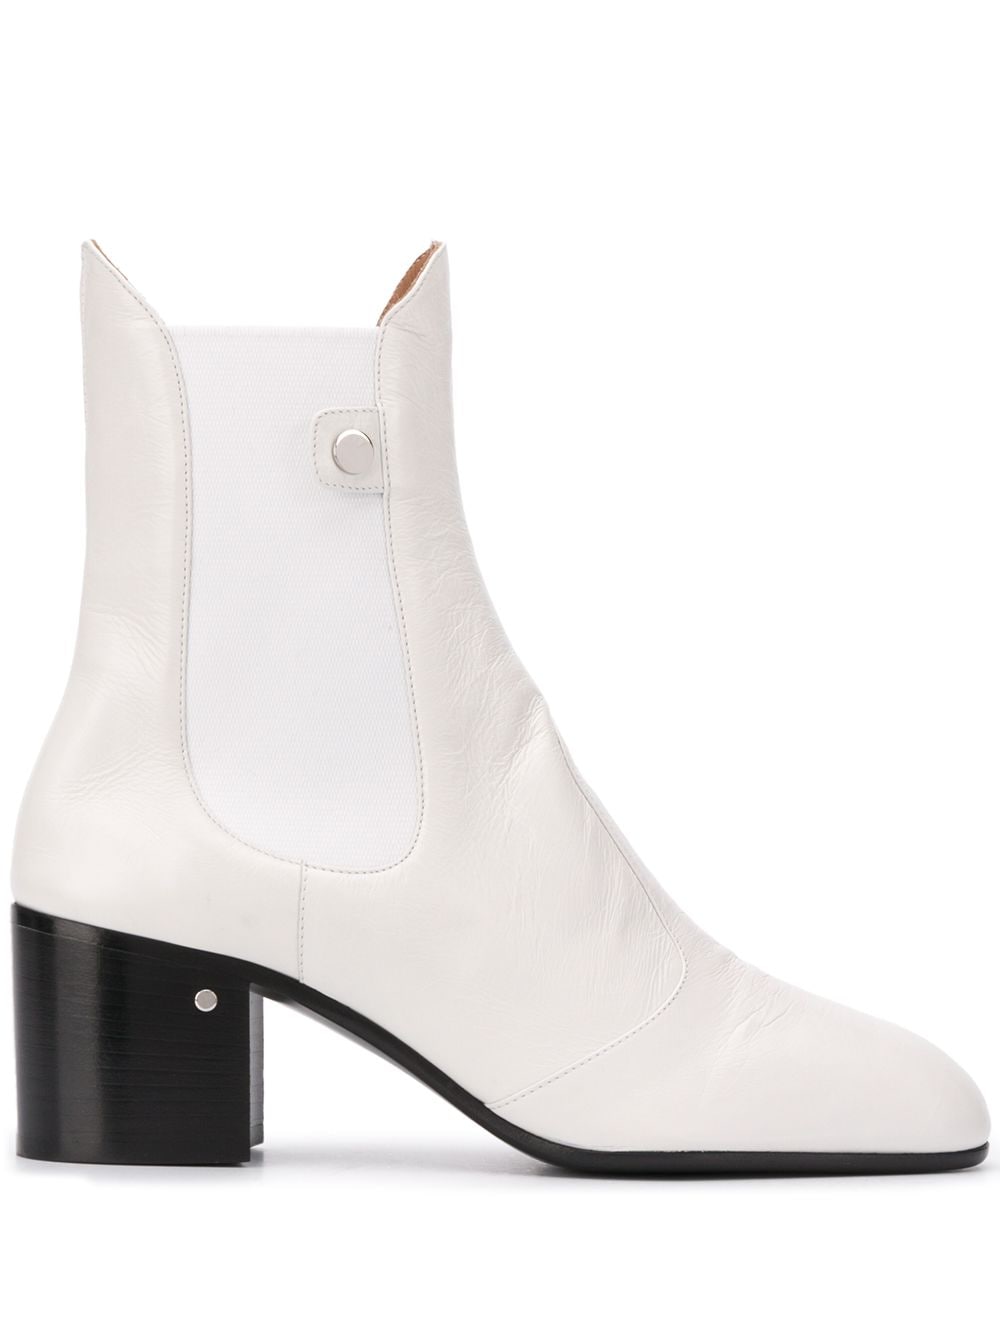 Laurence Dacade Angie ankle boots - White von Laurence Dacade